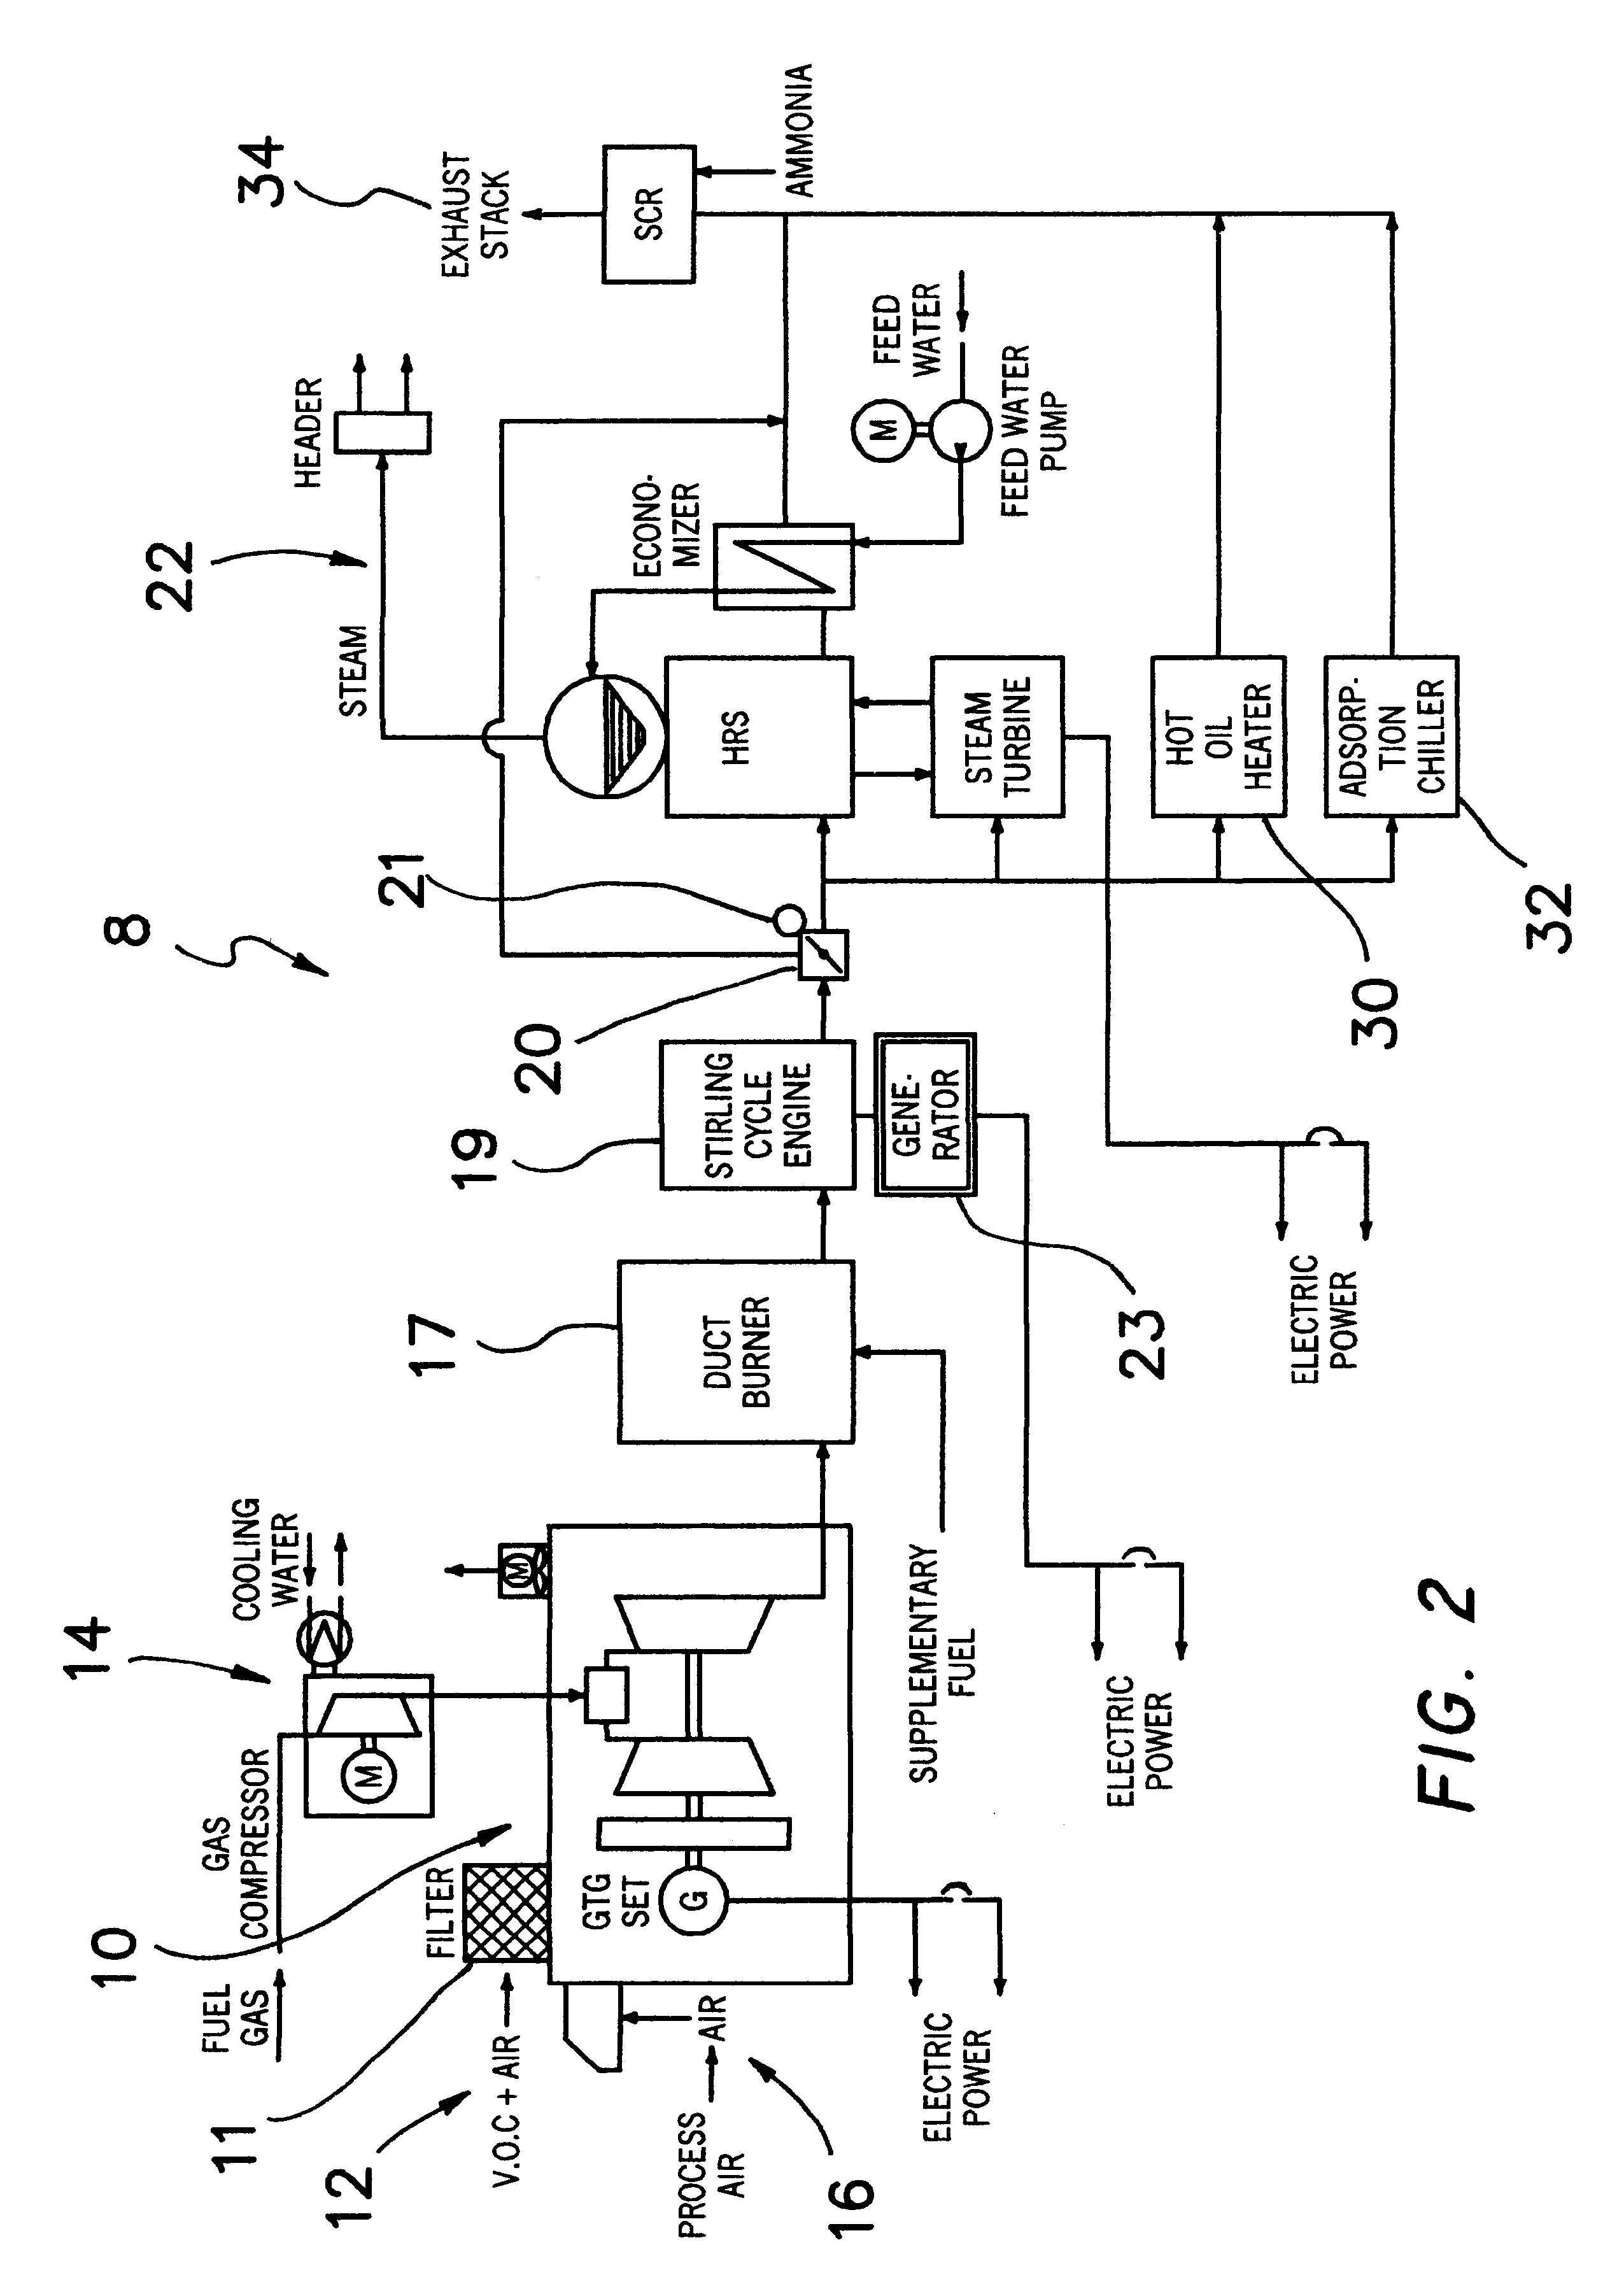 Advanced combined cycle co-generation abatement system